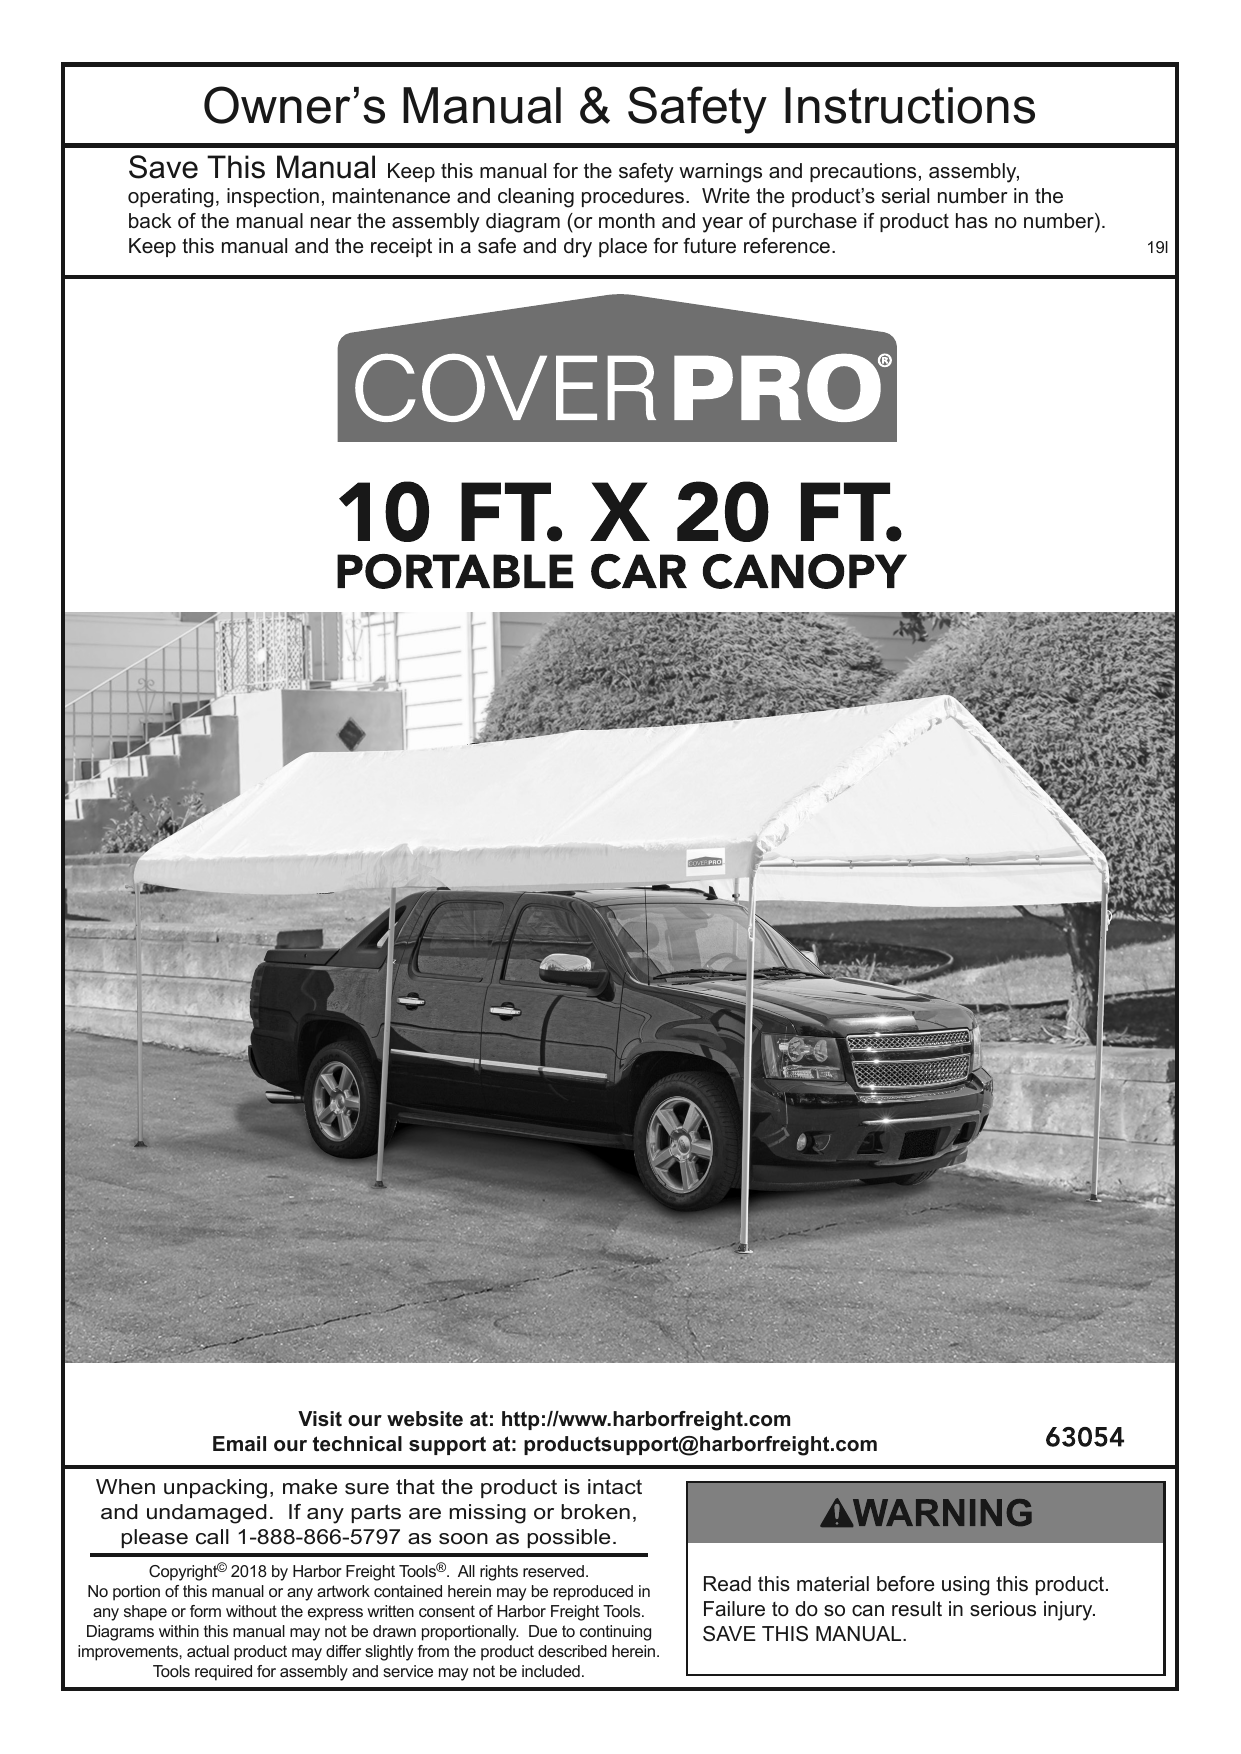 Coverpro 63054 10 Ft X 20 Ft Portable Car Canopy Owner S Manual Manualzz